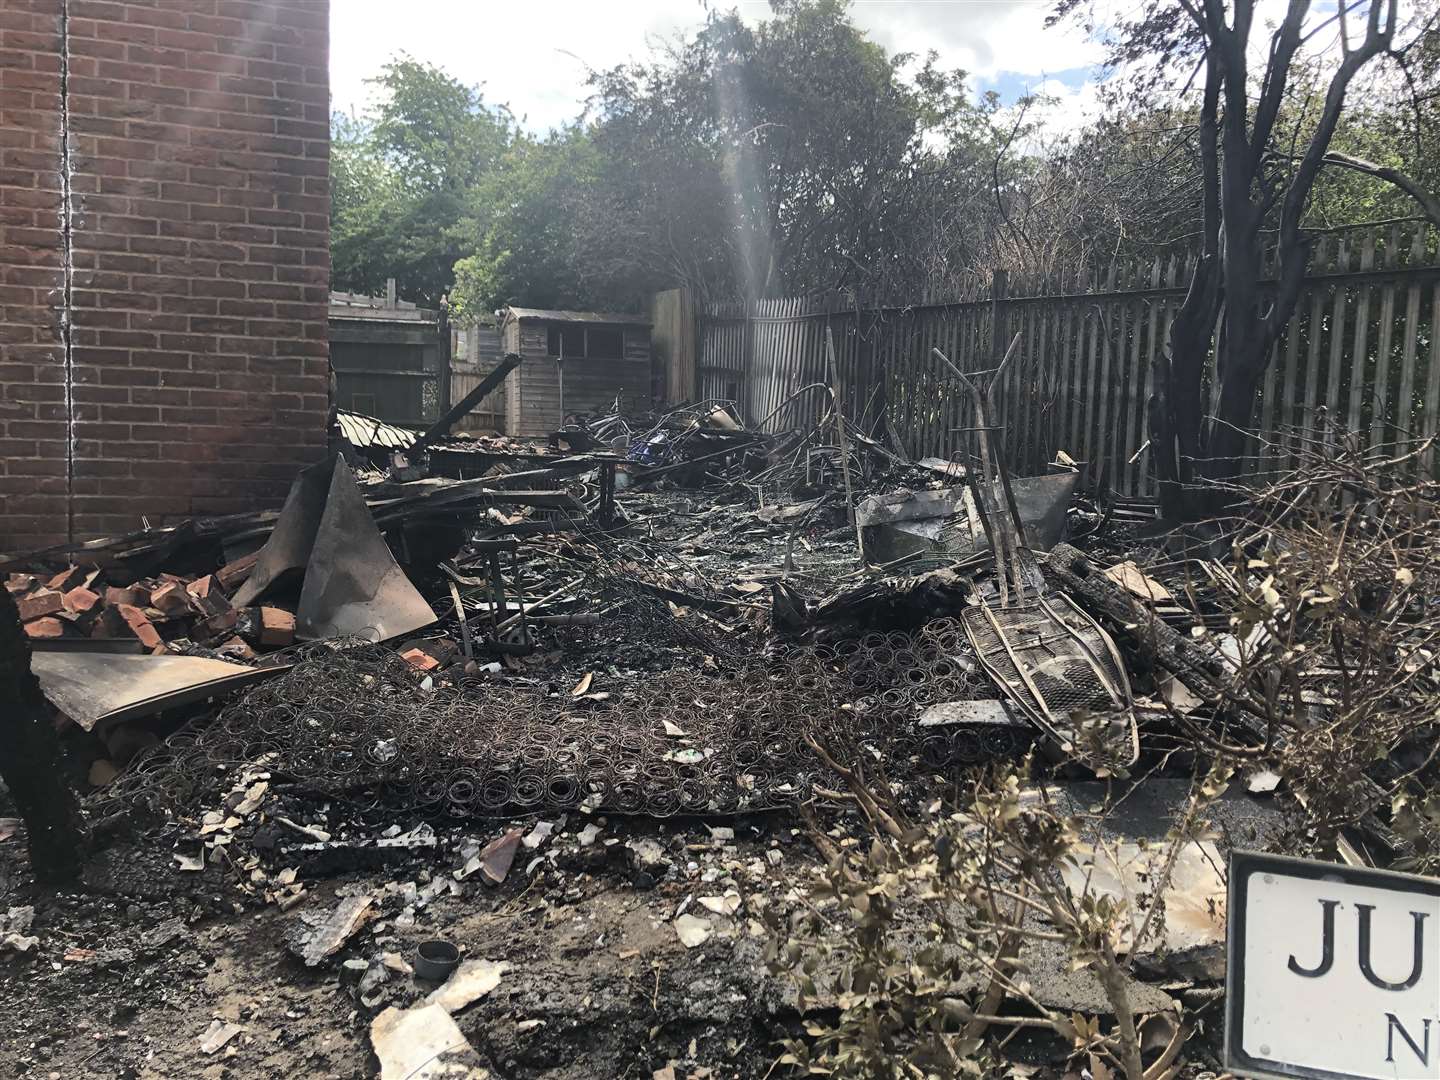 The aftermath of the fire in the back garden